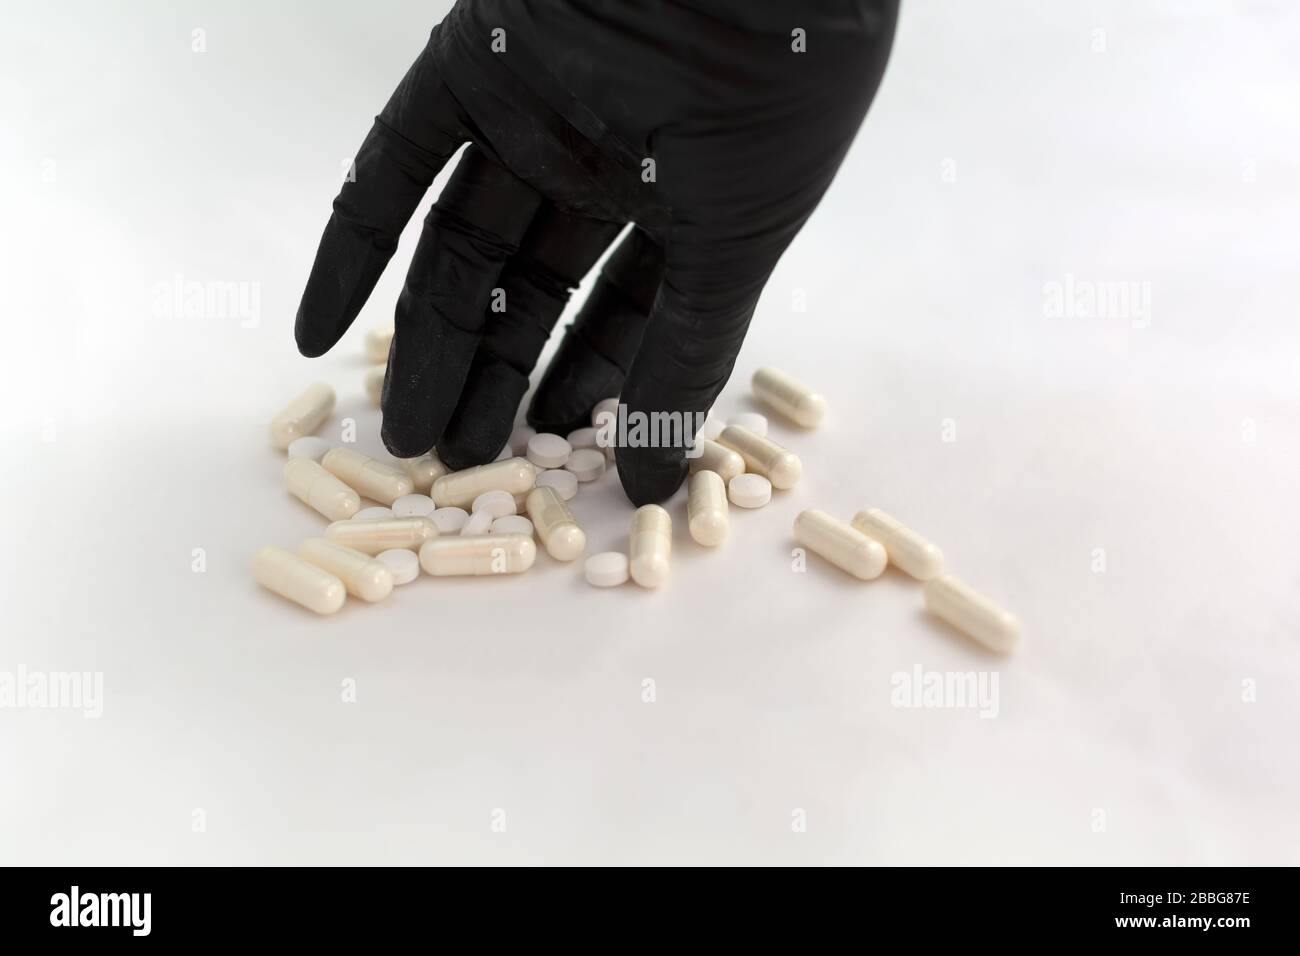 Hand in black latex glove taking pill from a bunch of drugs Stock Photo